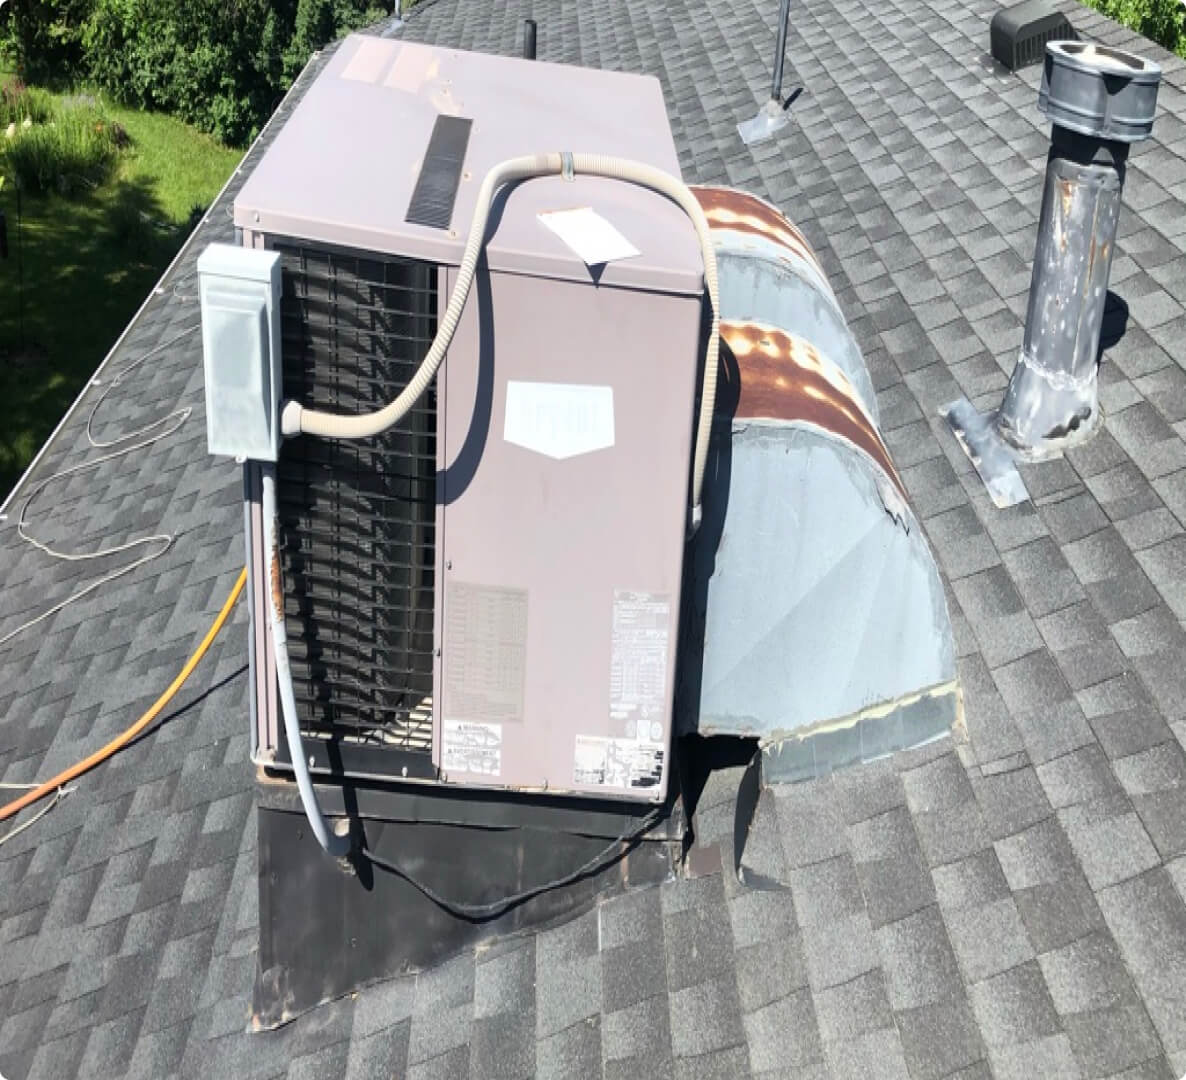 HVAC unit on residential shingled rooftop in daylight.